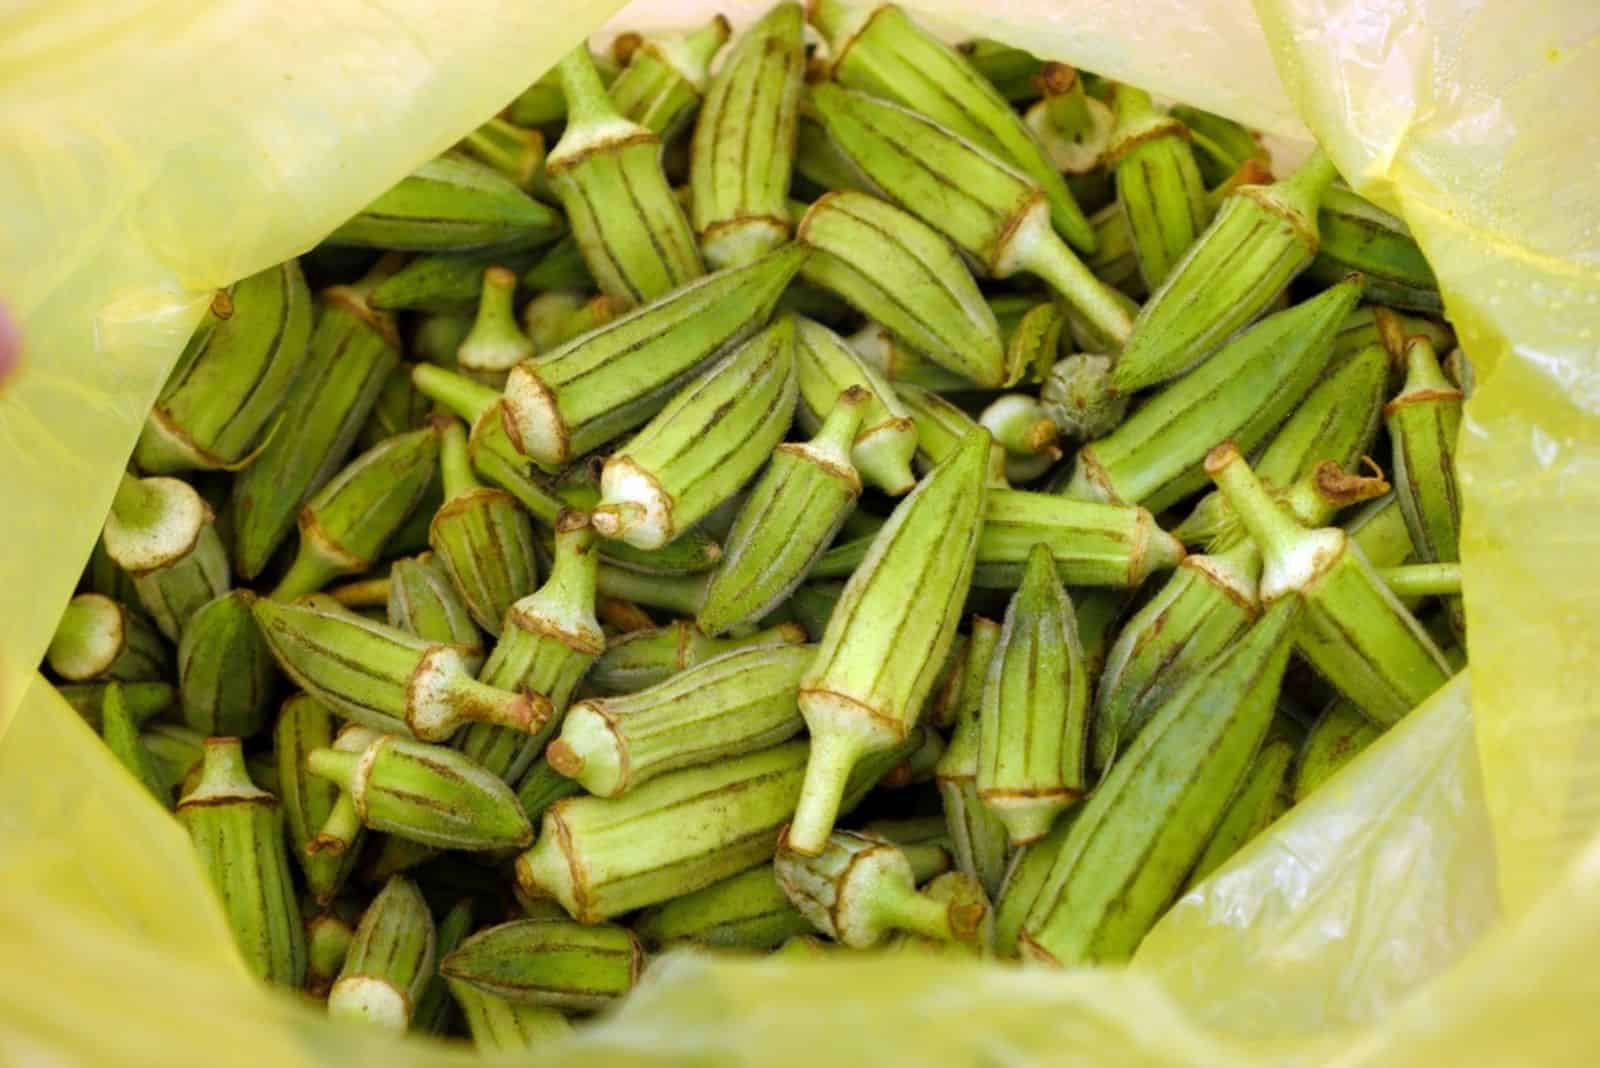  okra plant in a bag